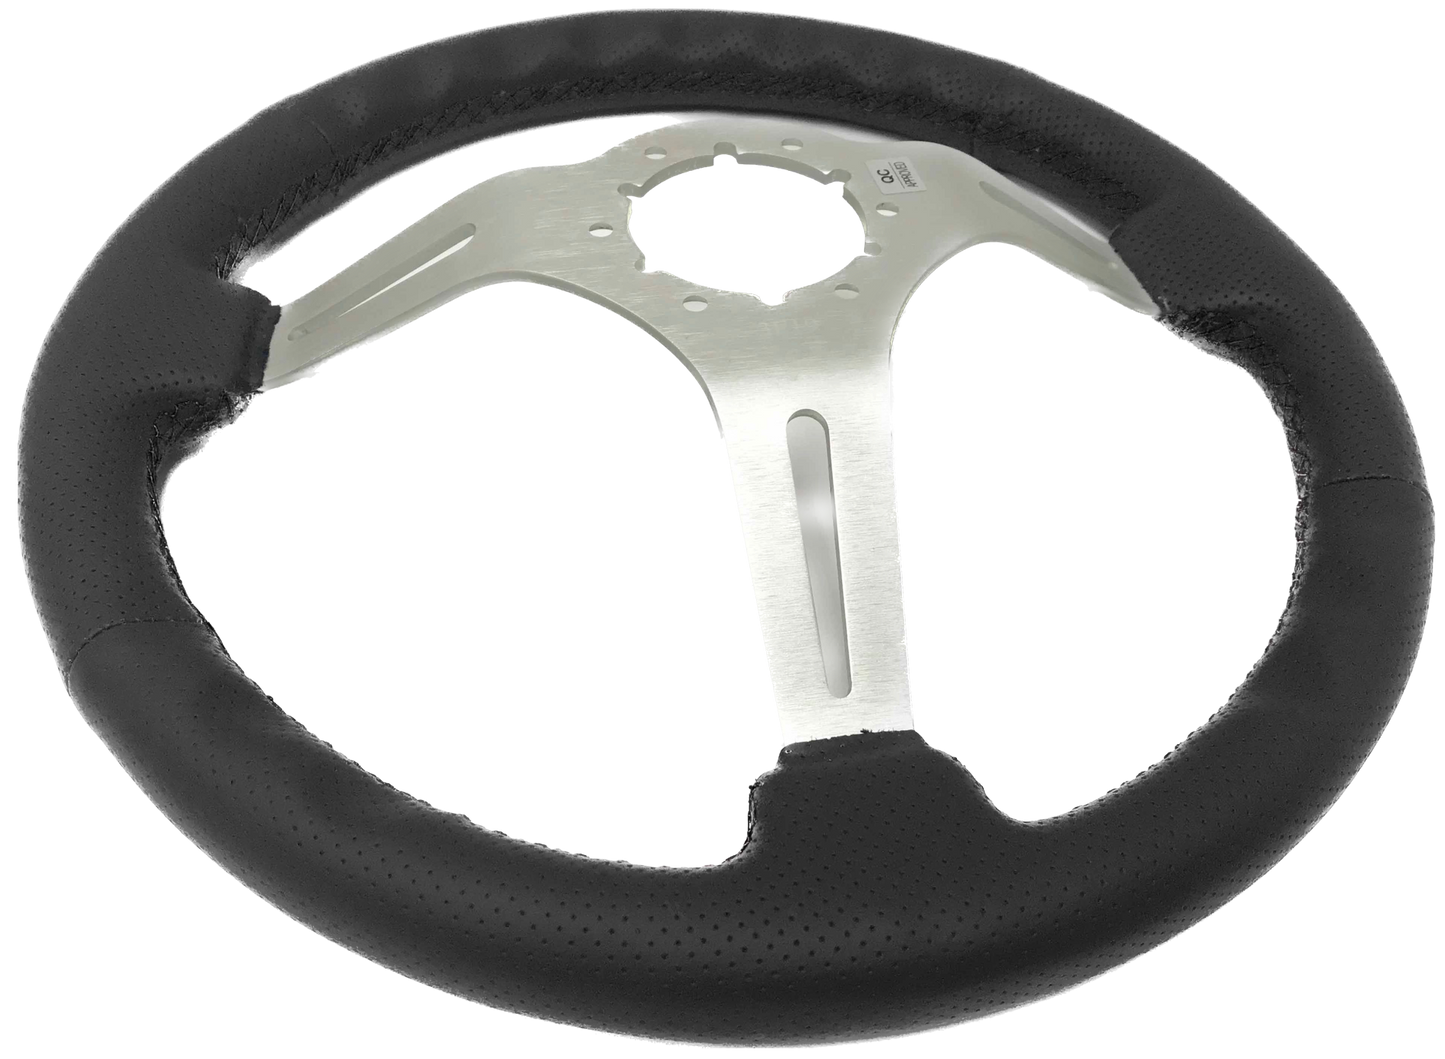 2000-04 Toyota Avalon Steering Wheel Kit | Perforated Leather | ST3587BLK-BLK